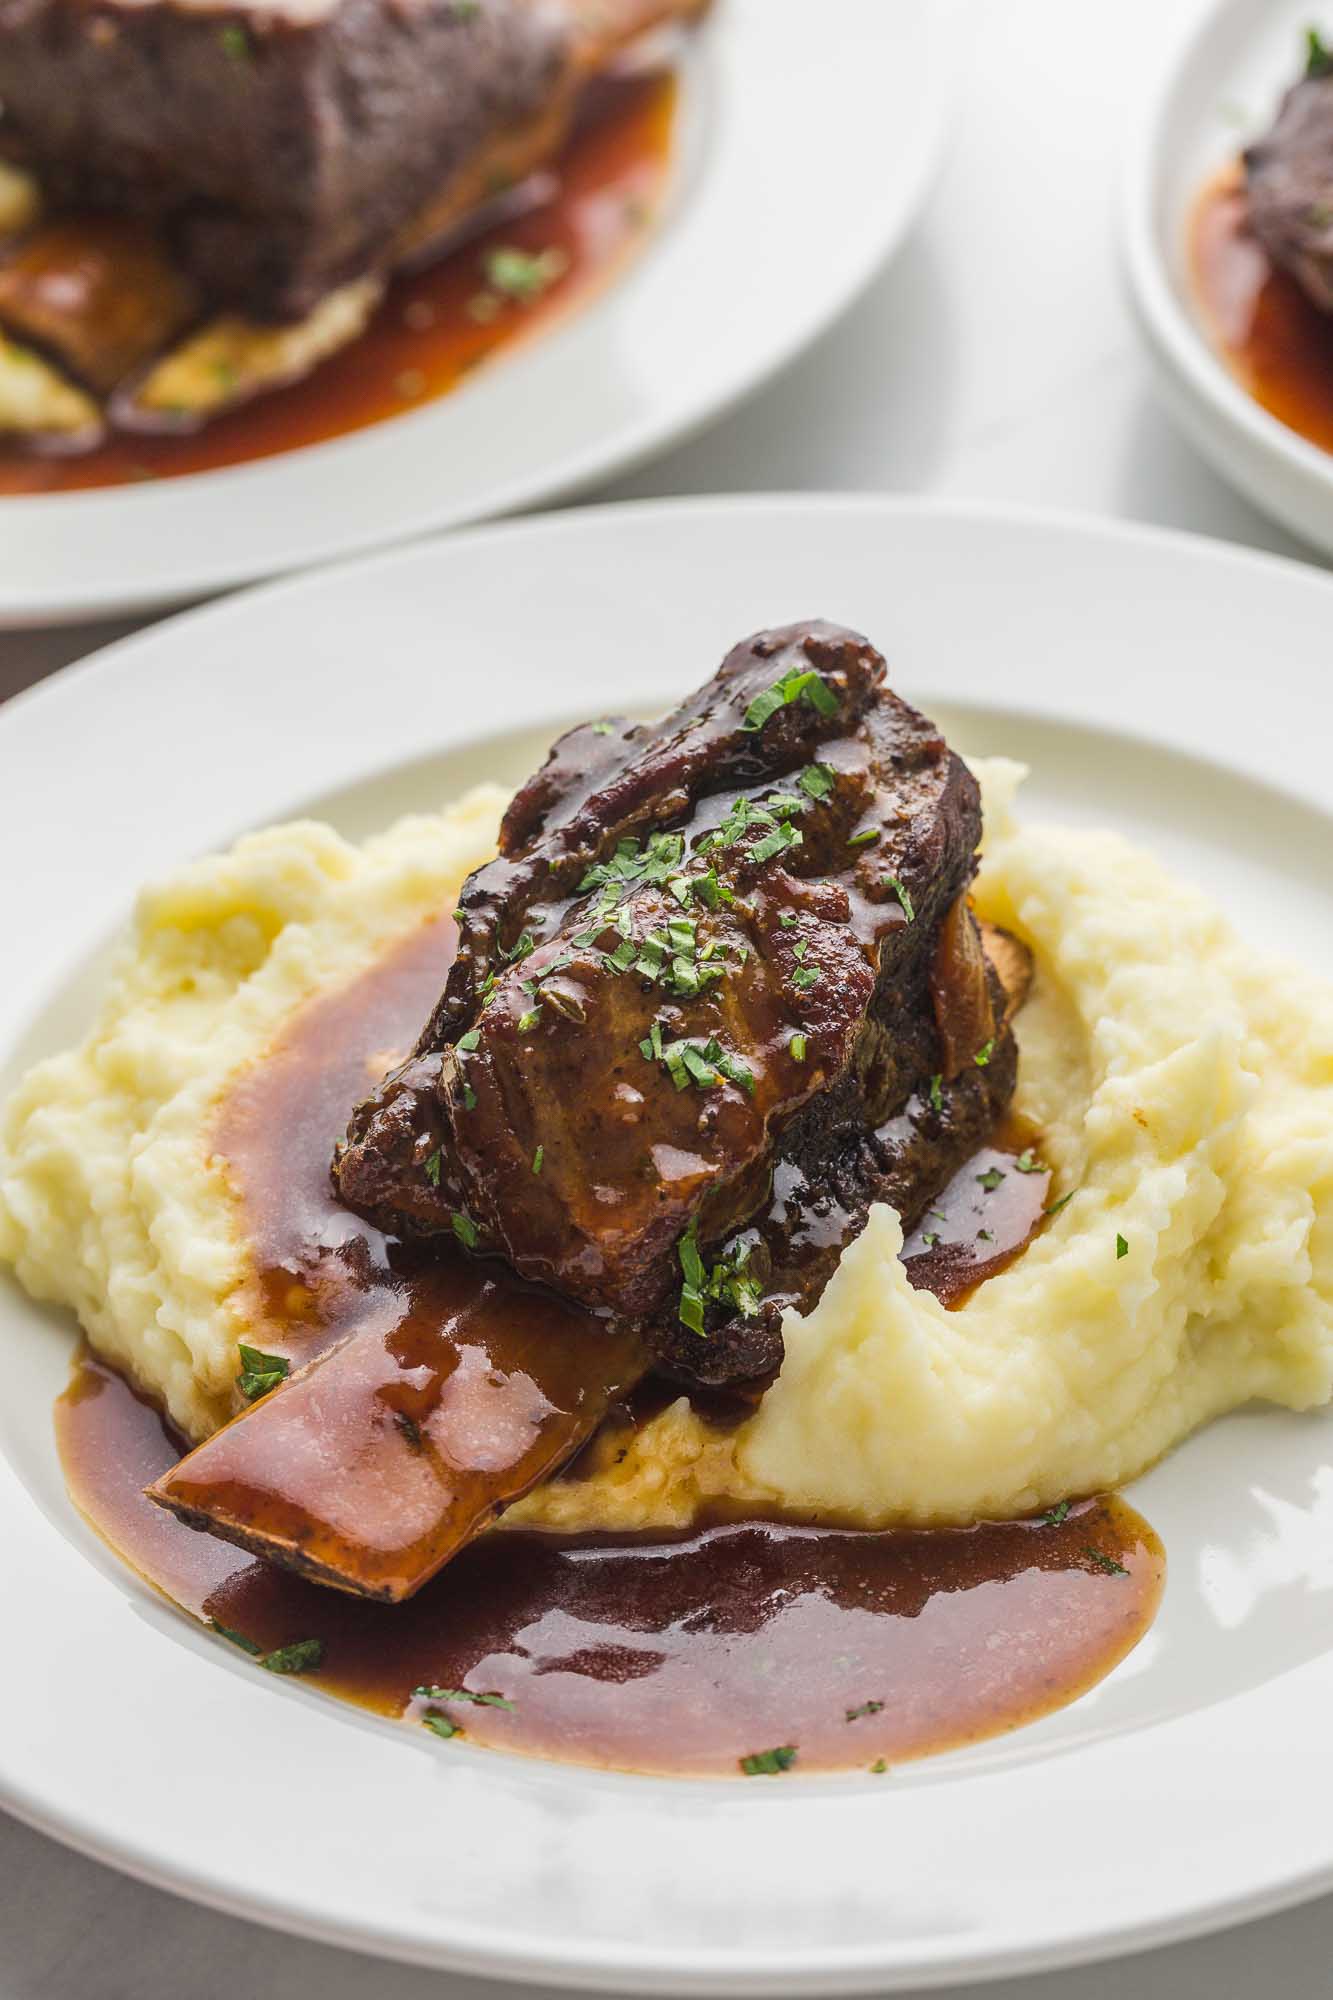 Braised short ribs served over mashed potatoes